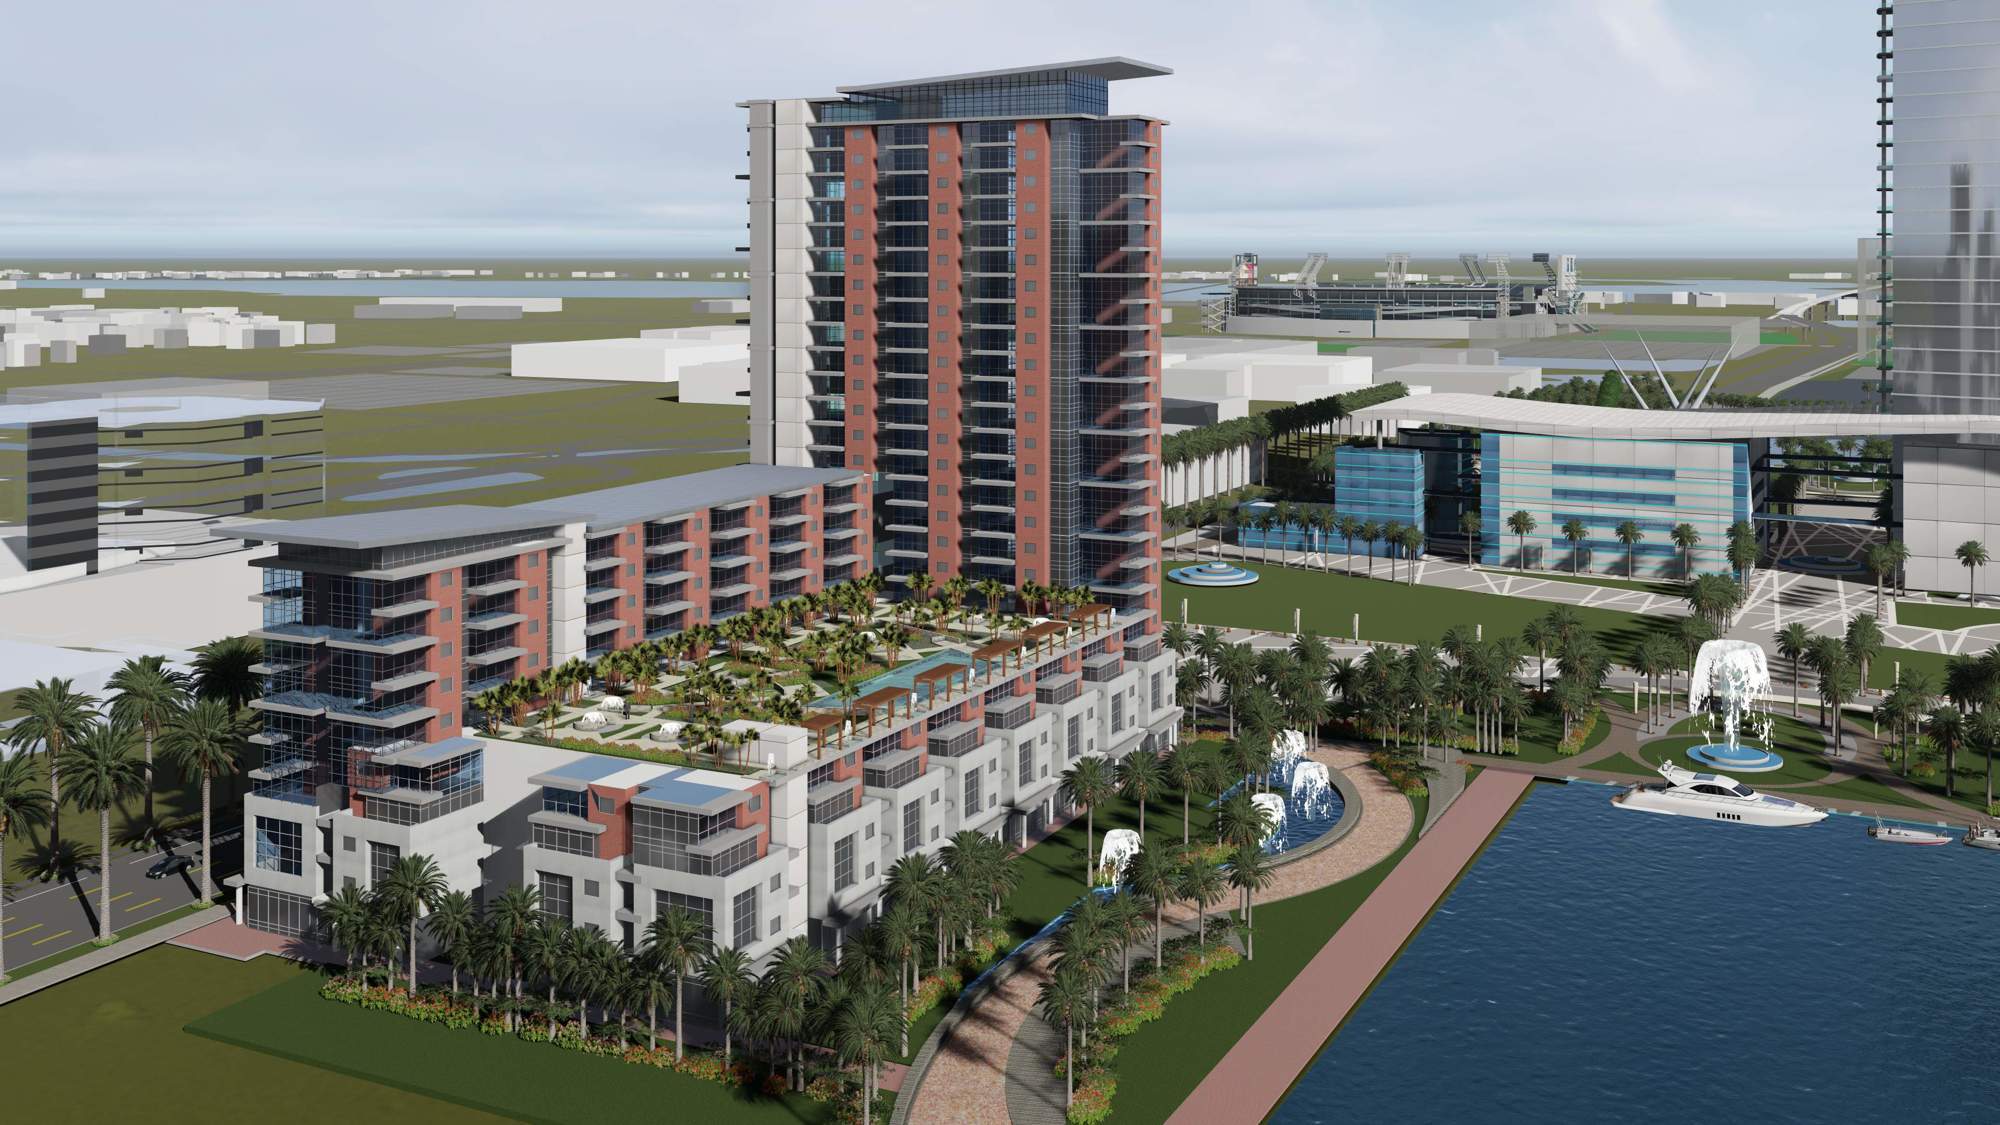 After the building is leveled, Jacksonville Riverfront Revitalization intends to redevelop the property with 300 residential units, retail and public park space.